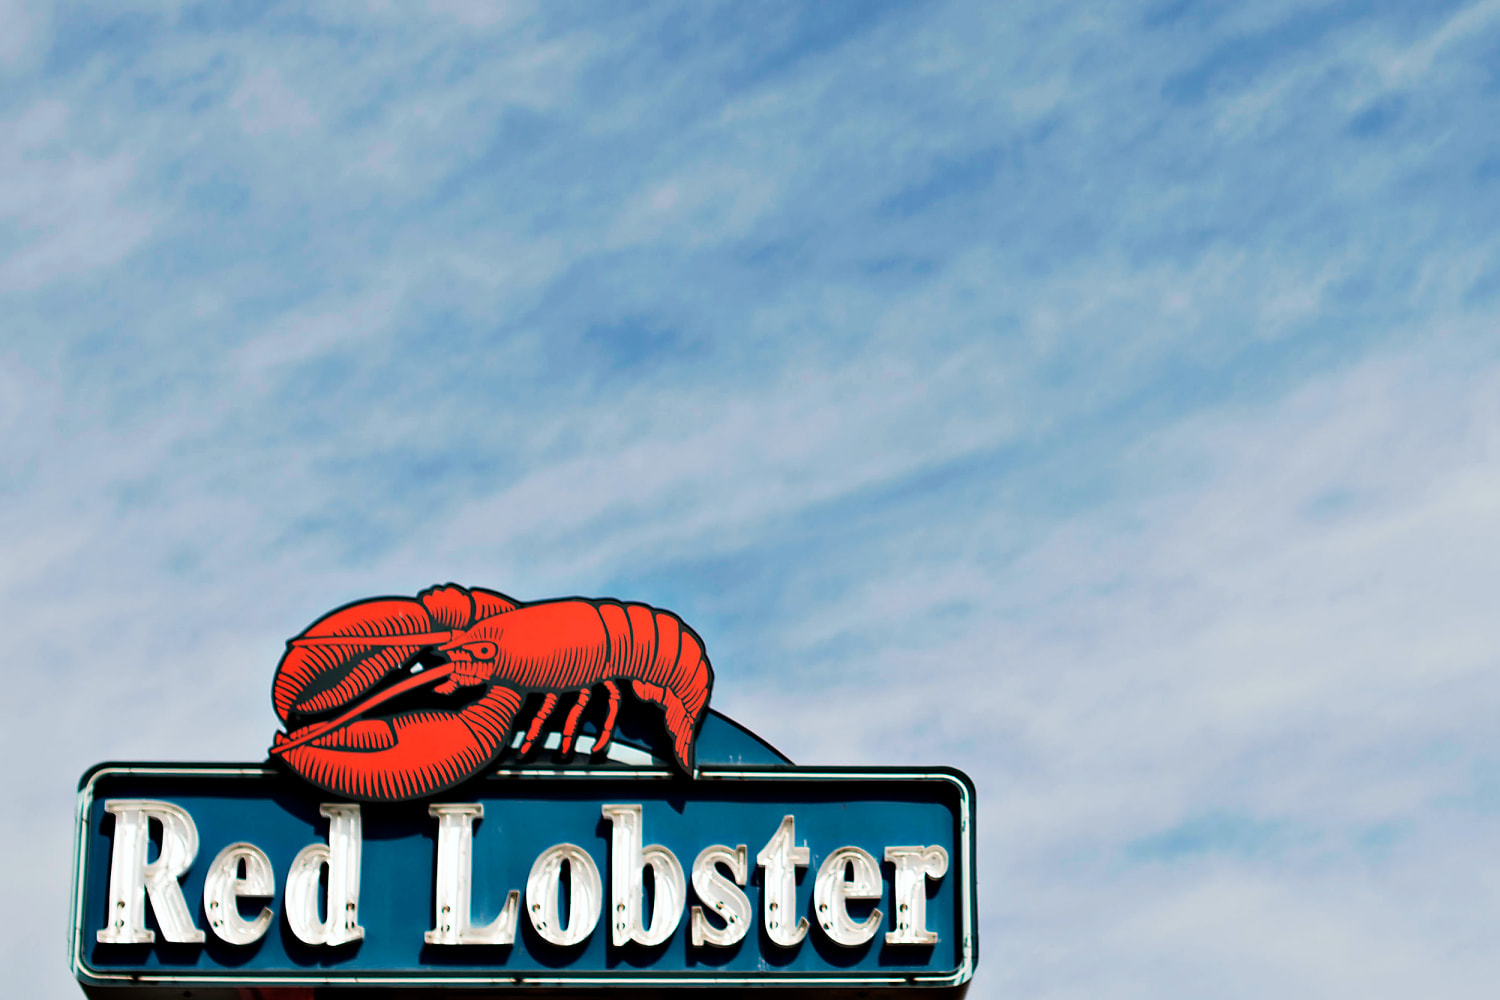 Red Lobster files for bankruptcy, restaurants will stay open